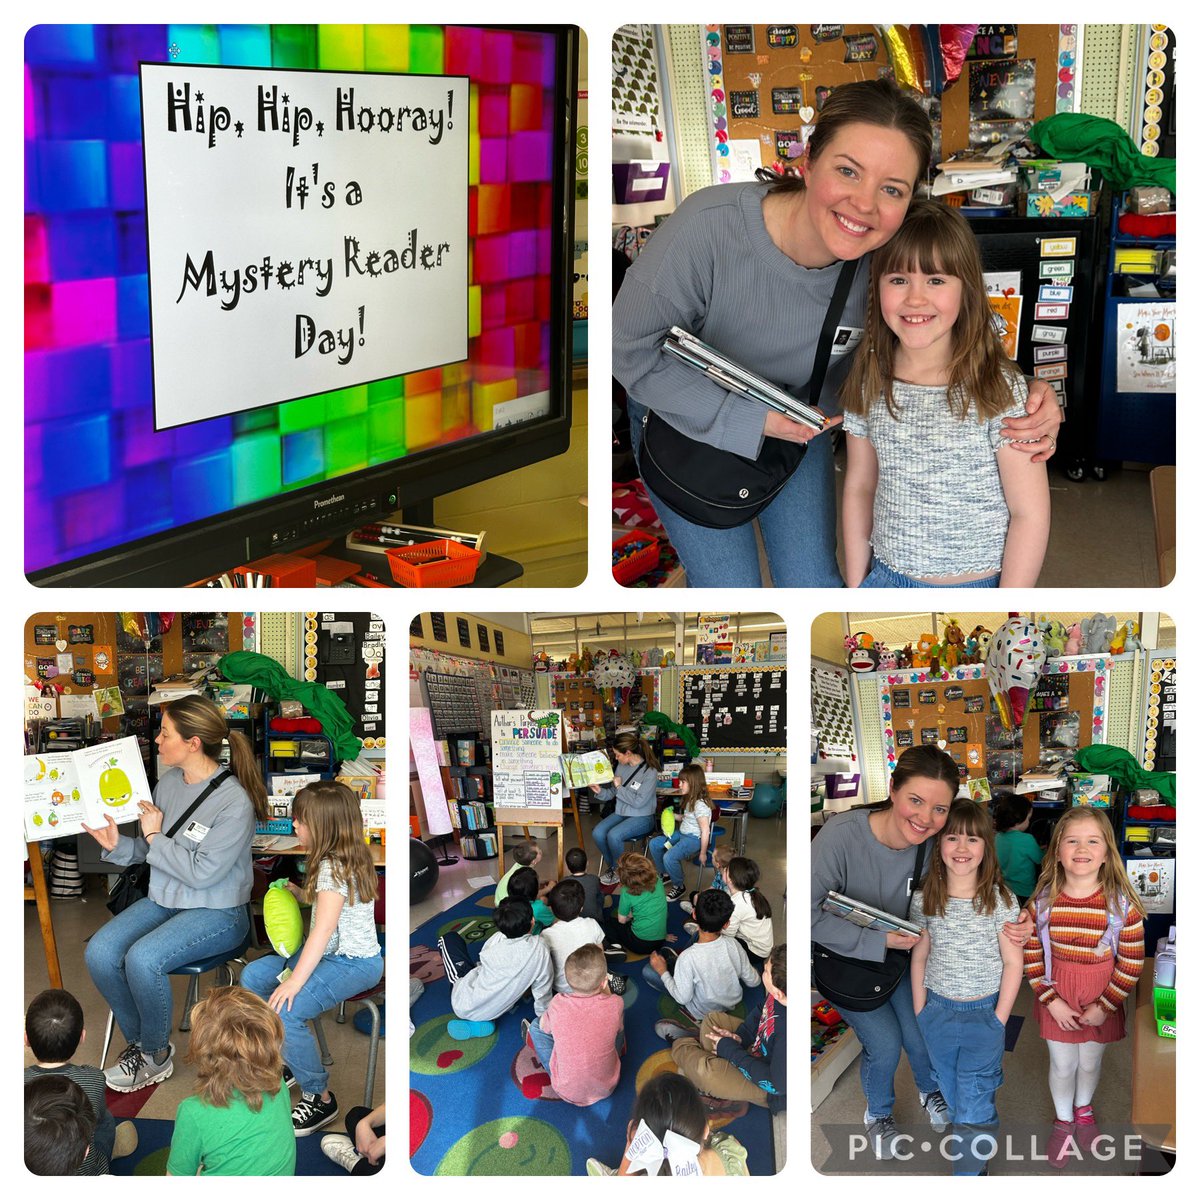 Ruby’s mom was our Mystery Reader today! 😊